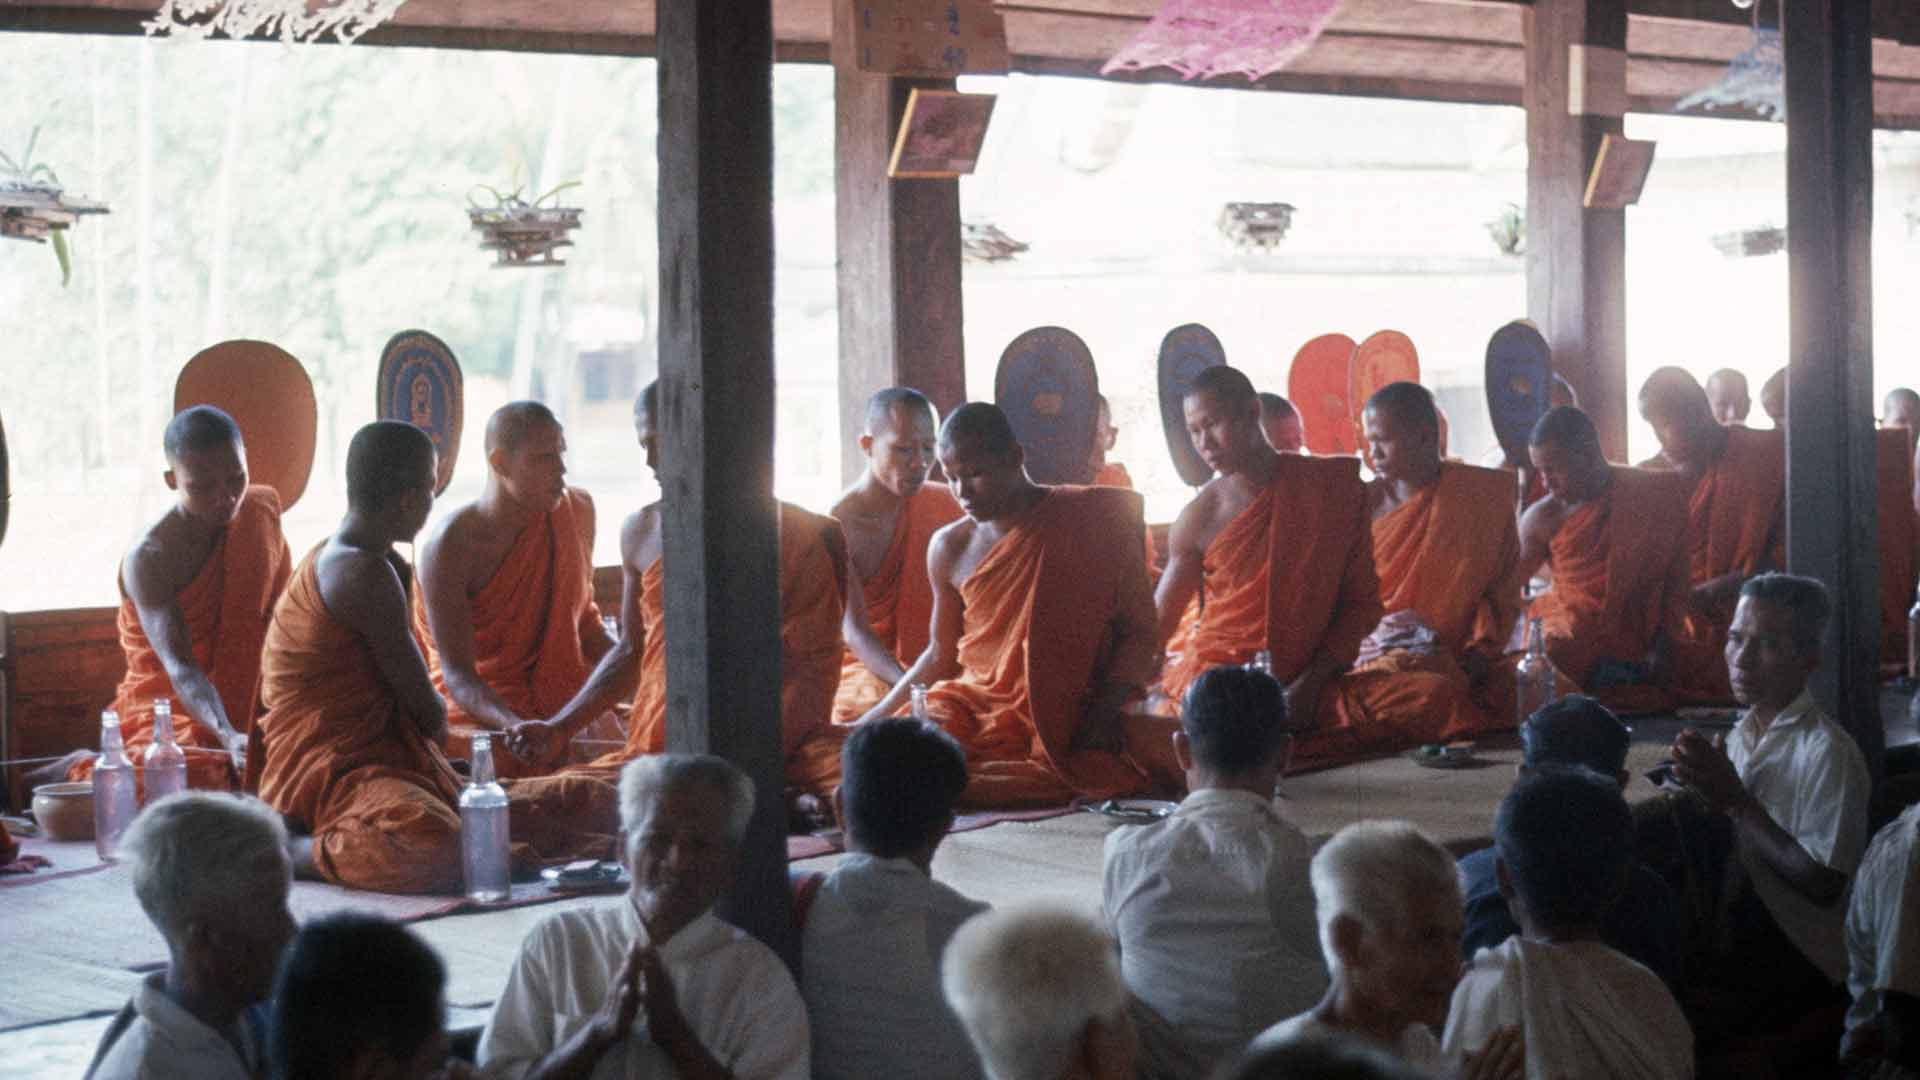 monks gather for meal, villagers separately dine